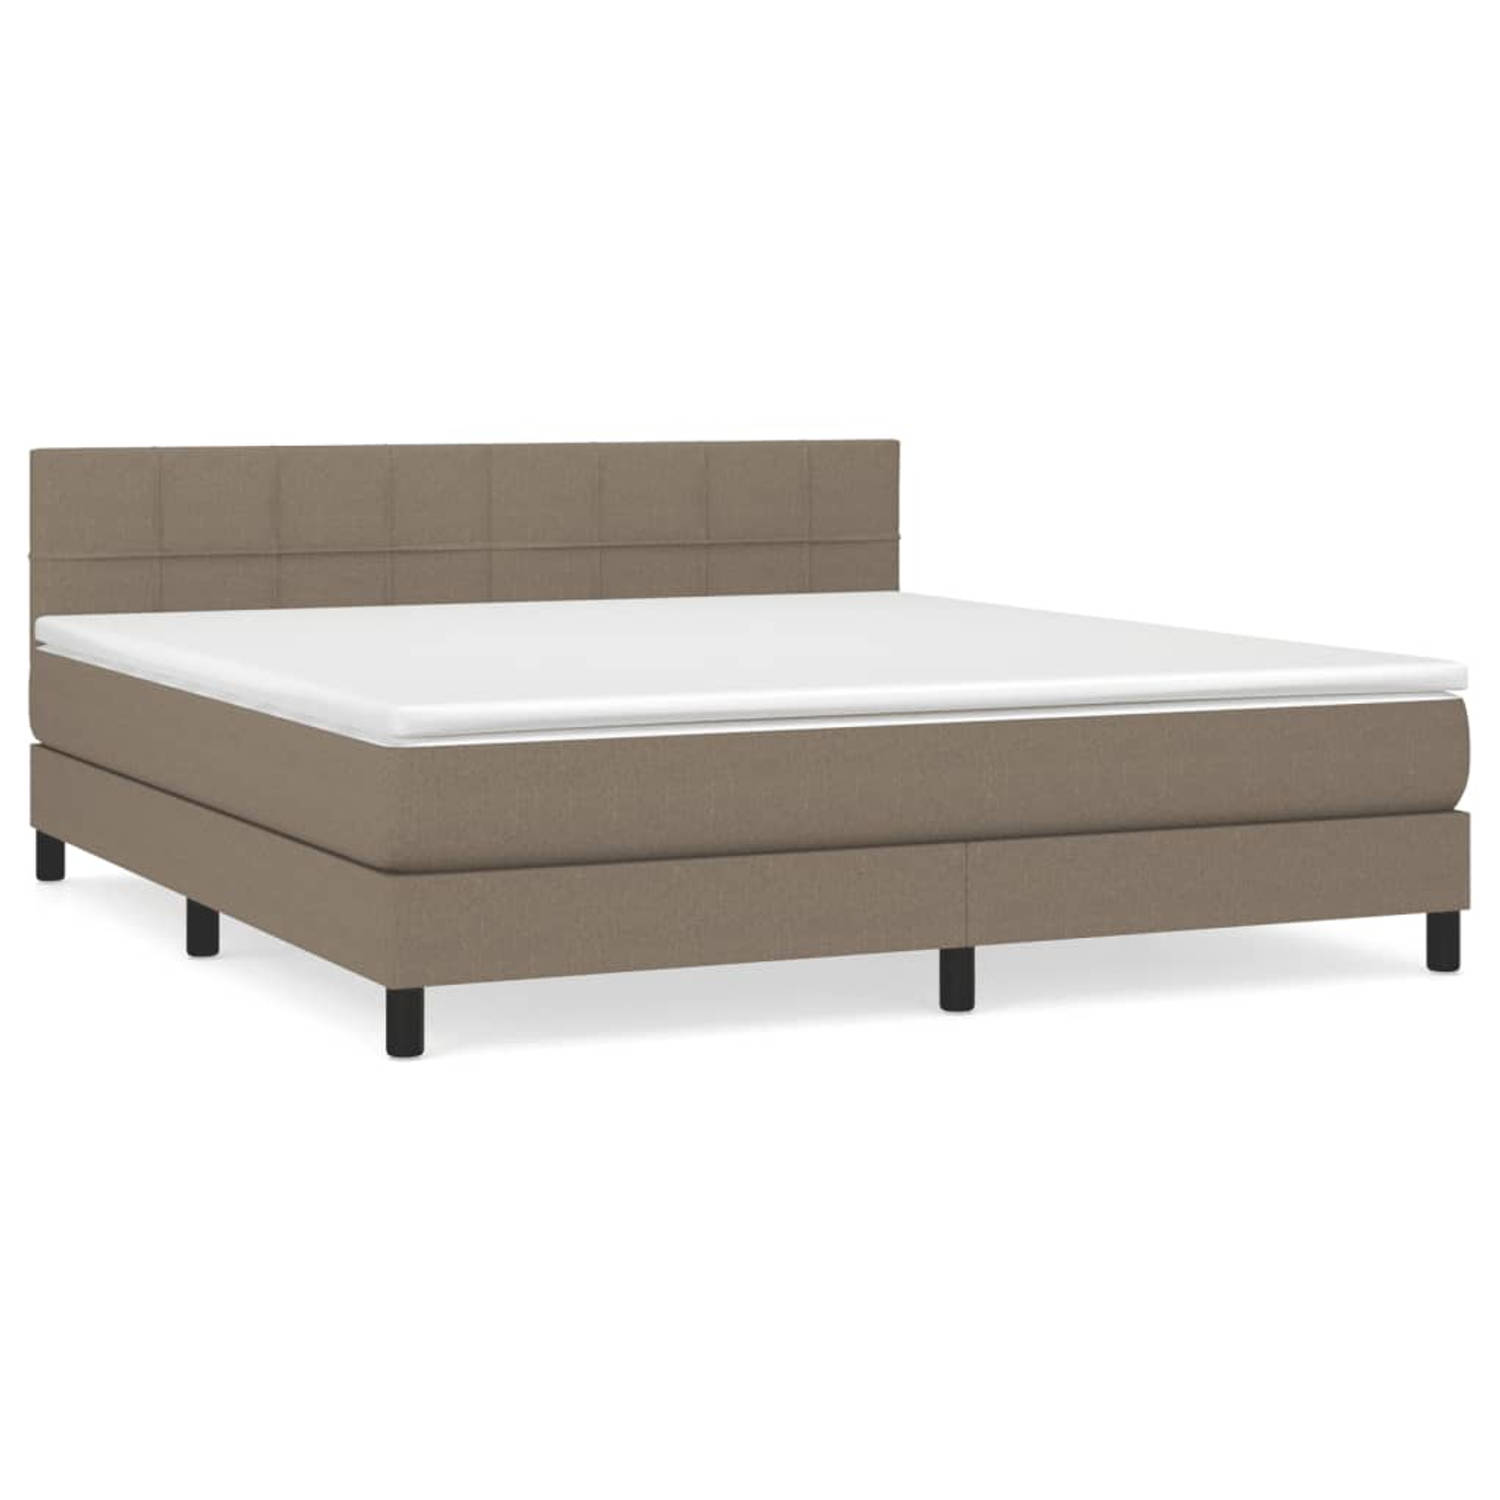 The Living Store Boxspringbed - snaam - Bed - 203 x 180 x 78/88 cm - Taupe